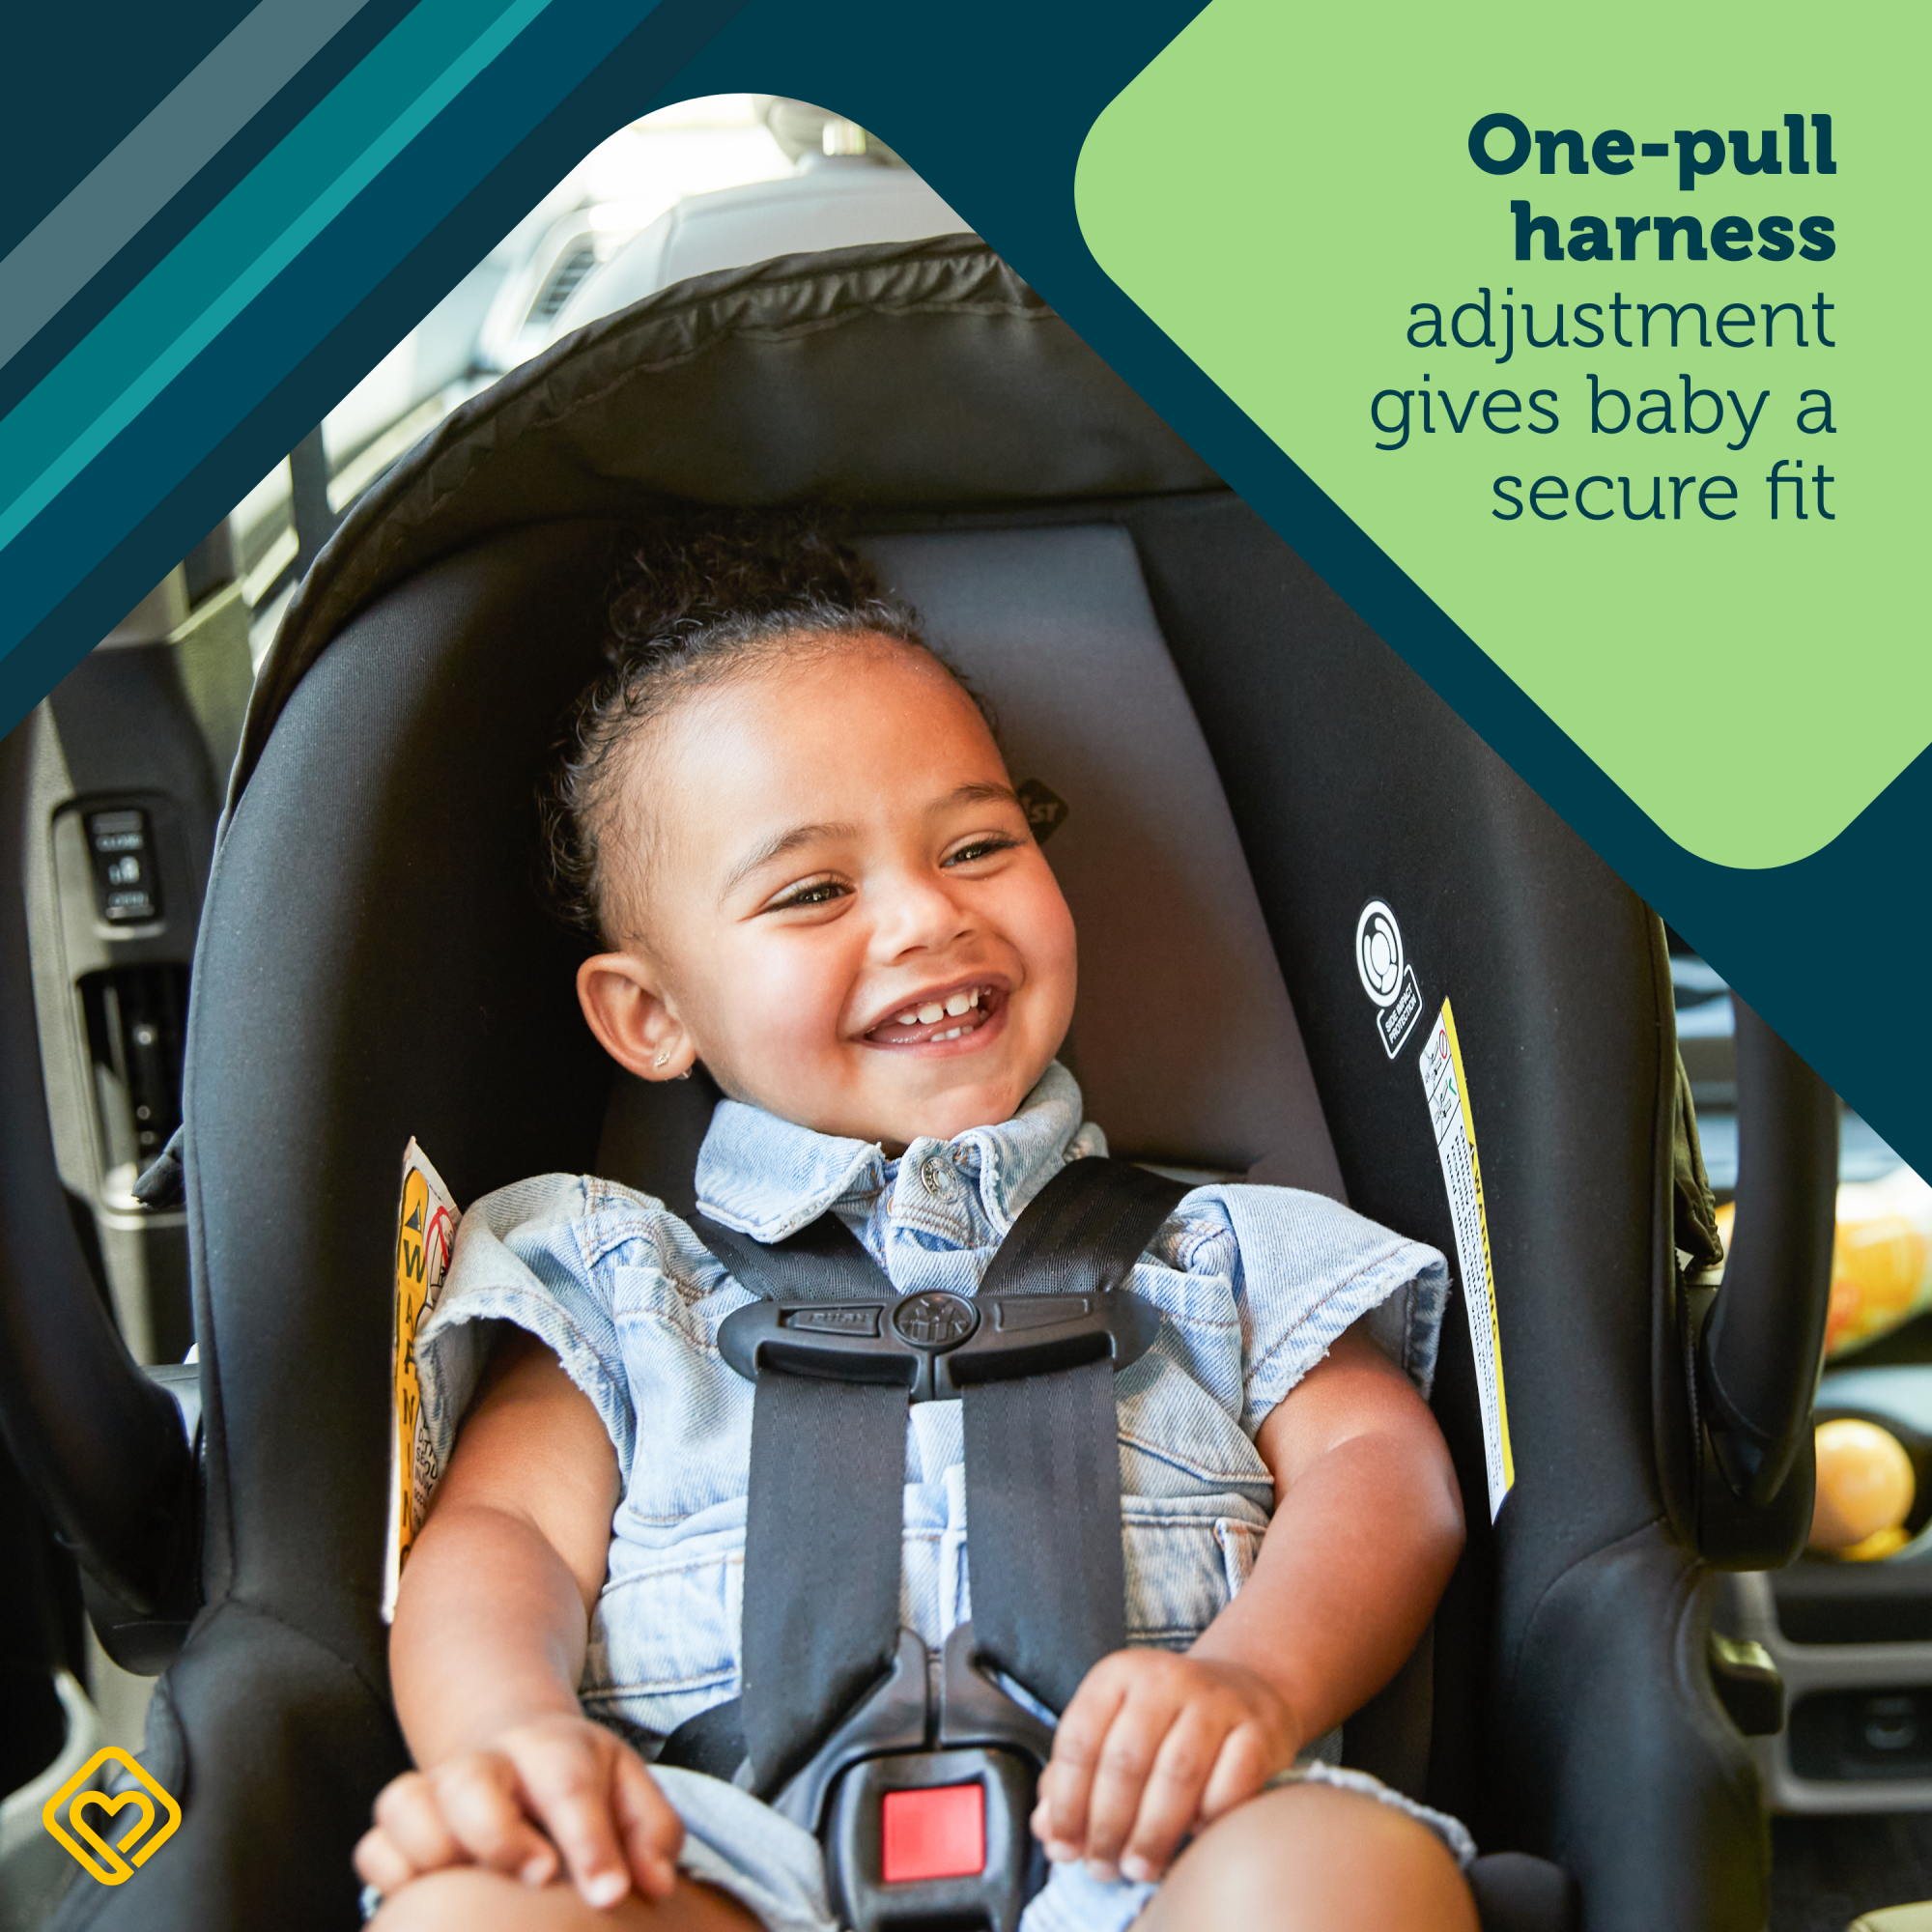 Comfort 35 Infant Car Seat - one-pull harness adjustment gives baby a secure fit